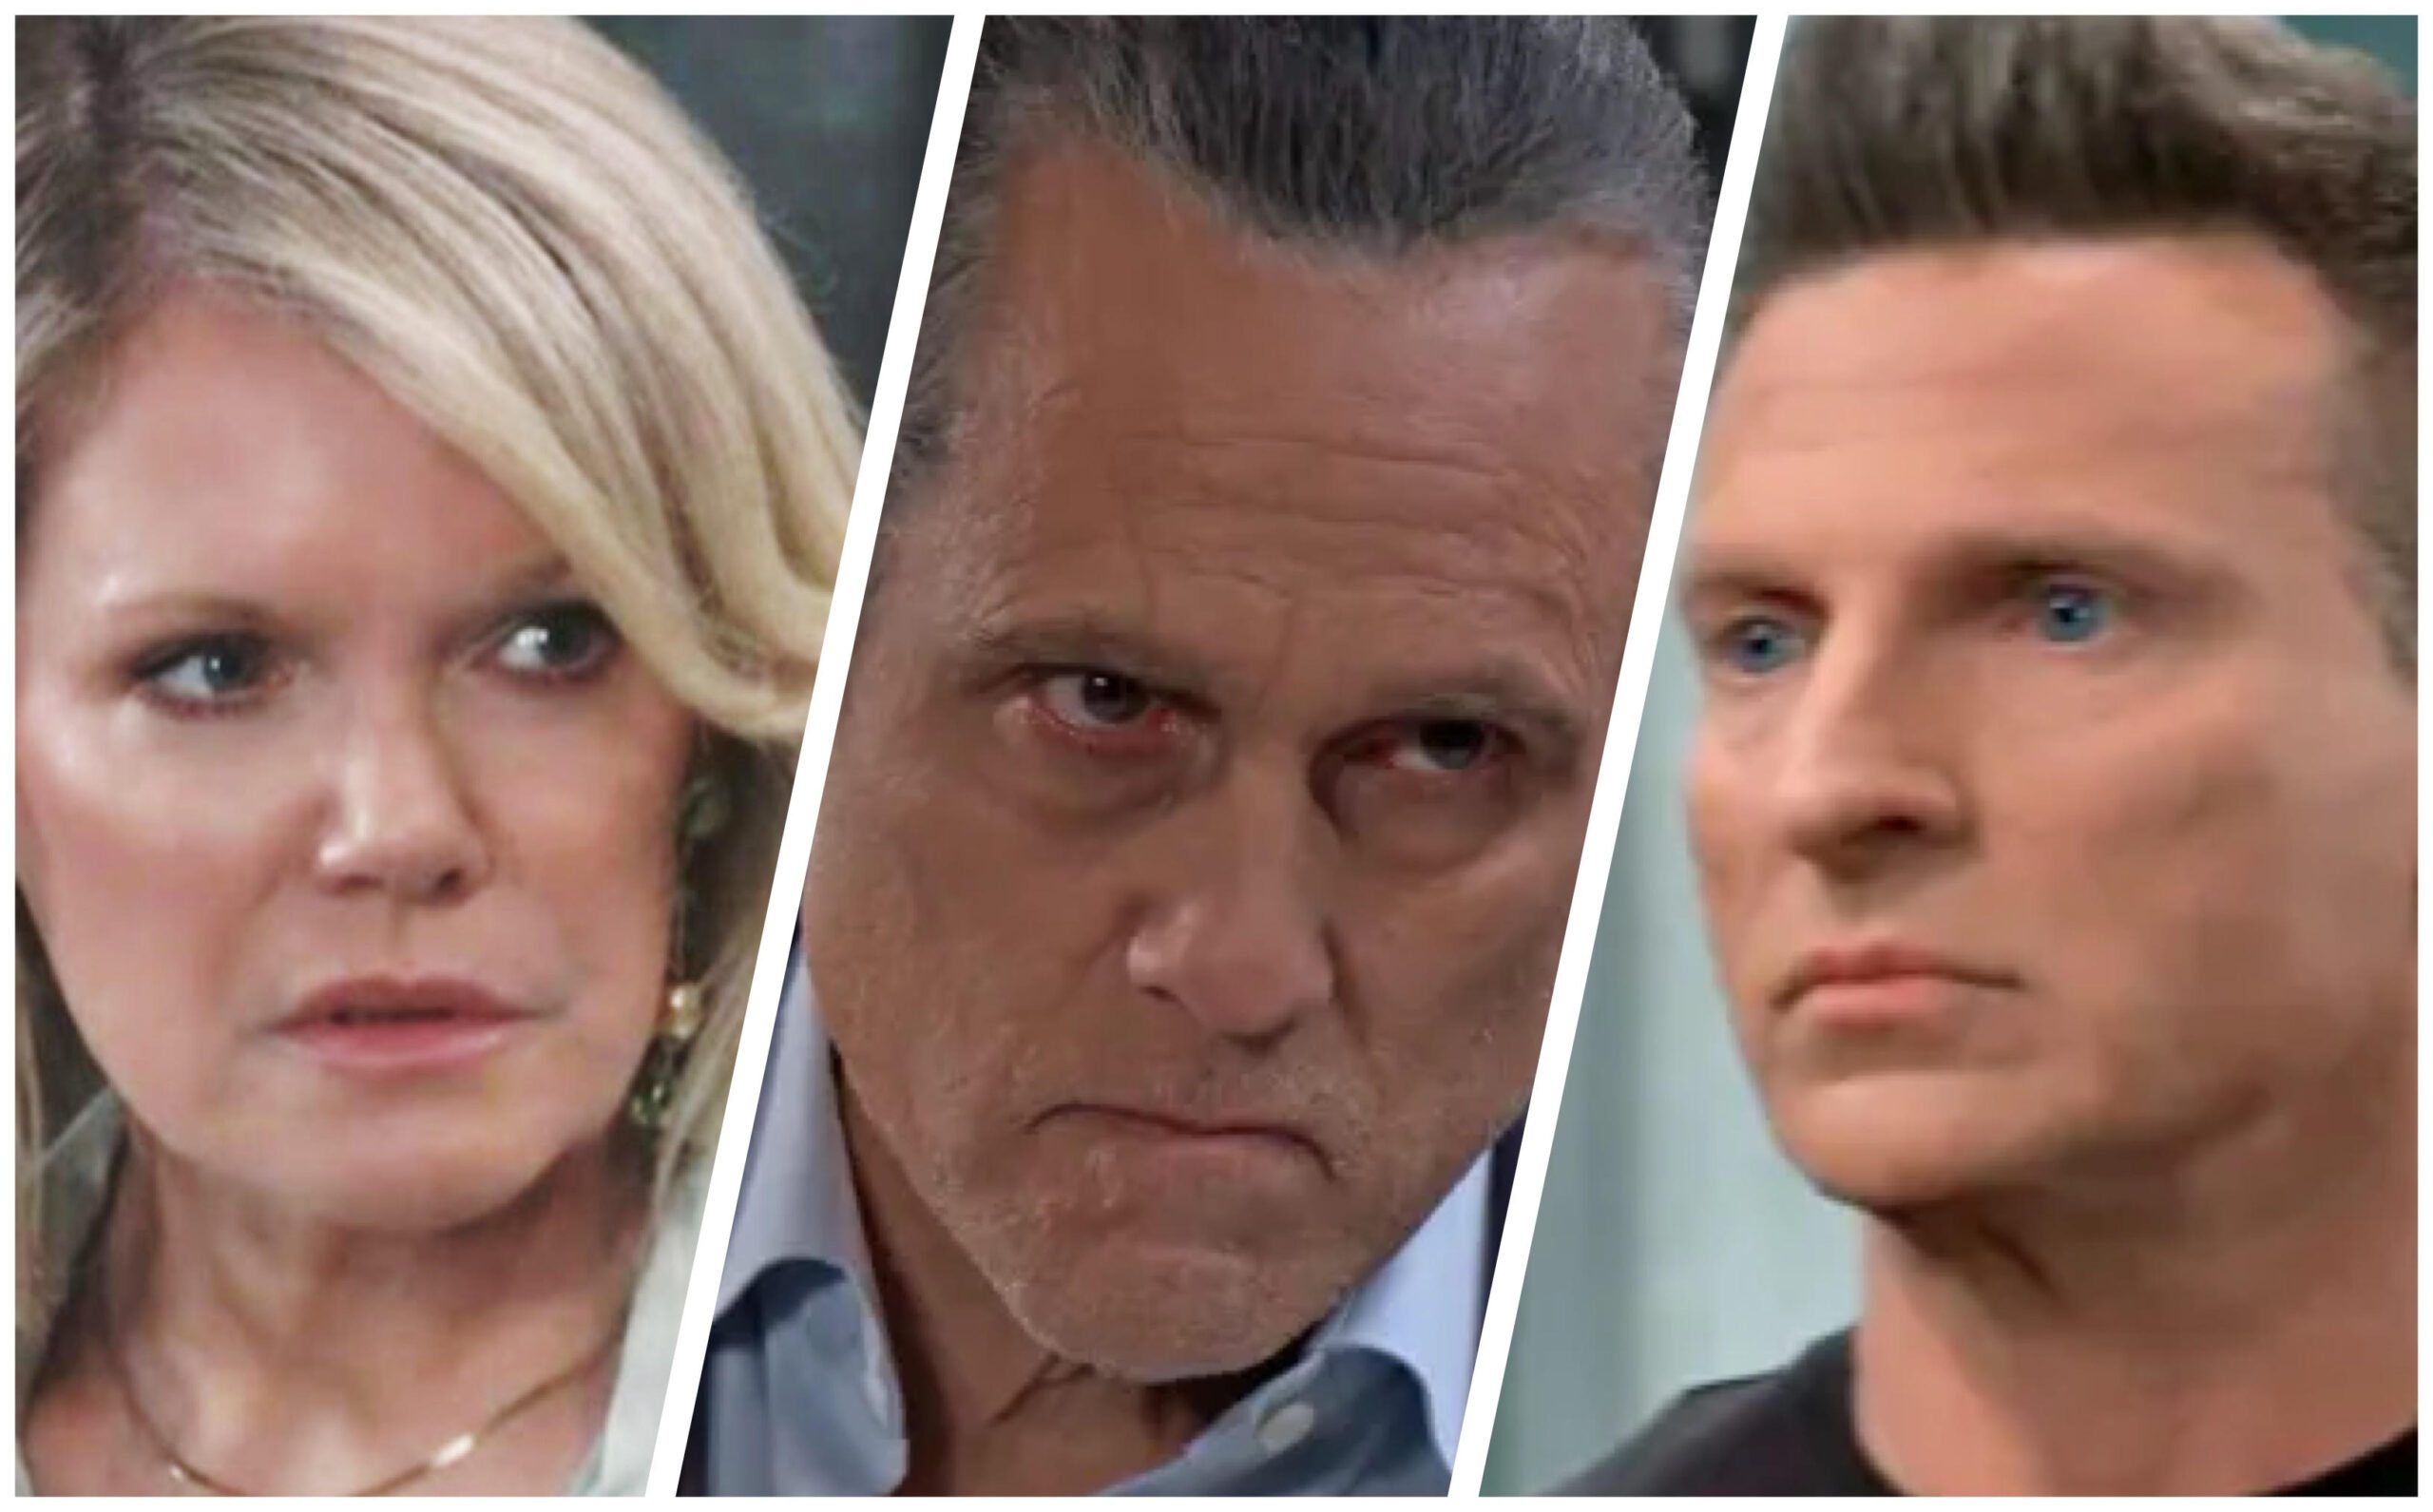 General Hospital spoilers Sonny Corinthos Jason Morgan and Ava Jerome in a tense situation